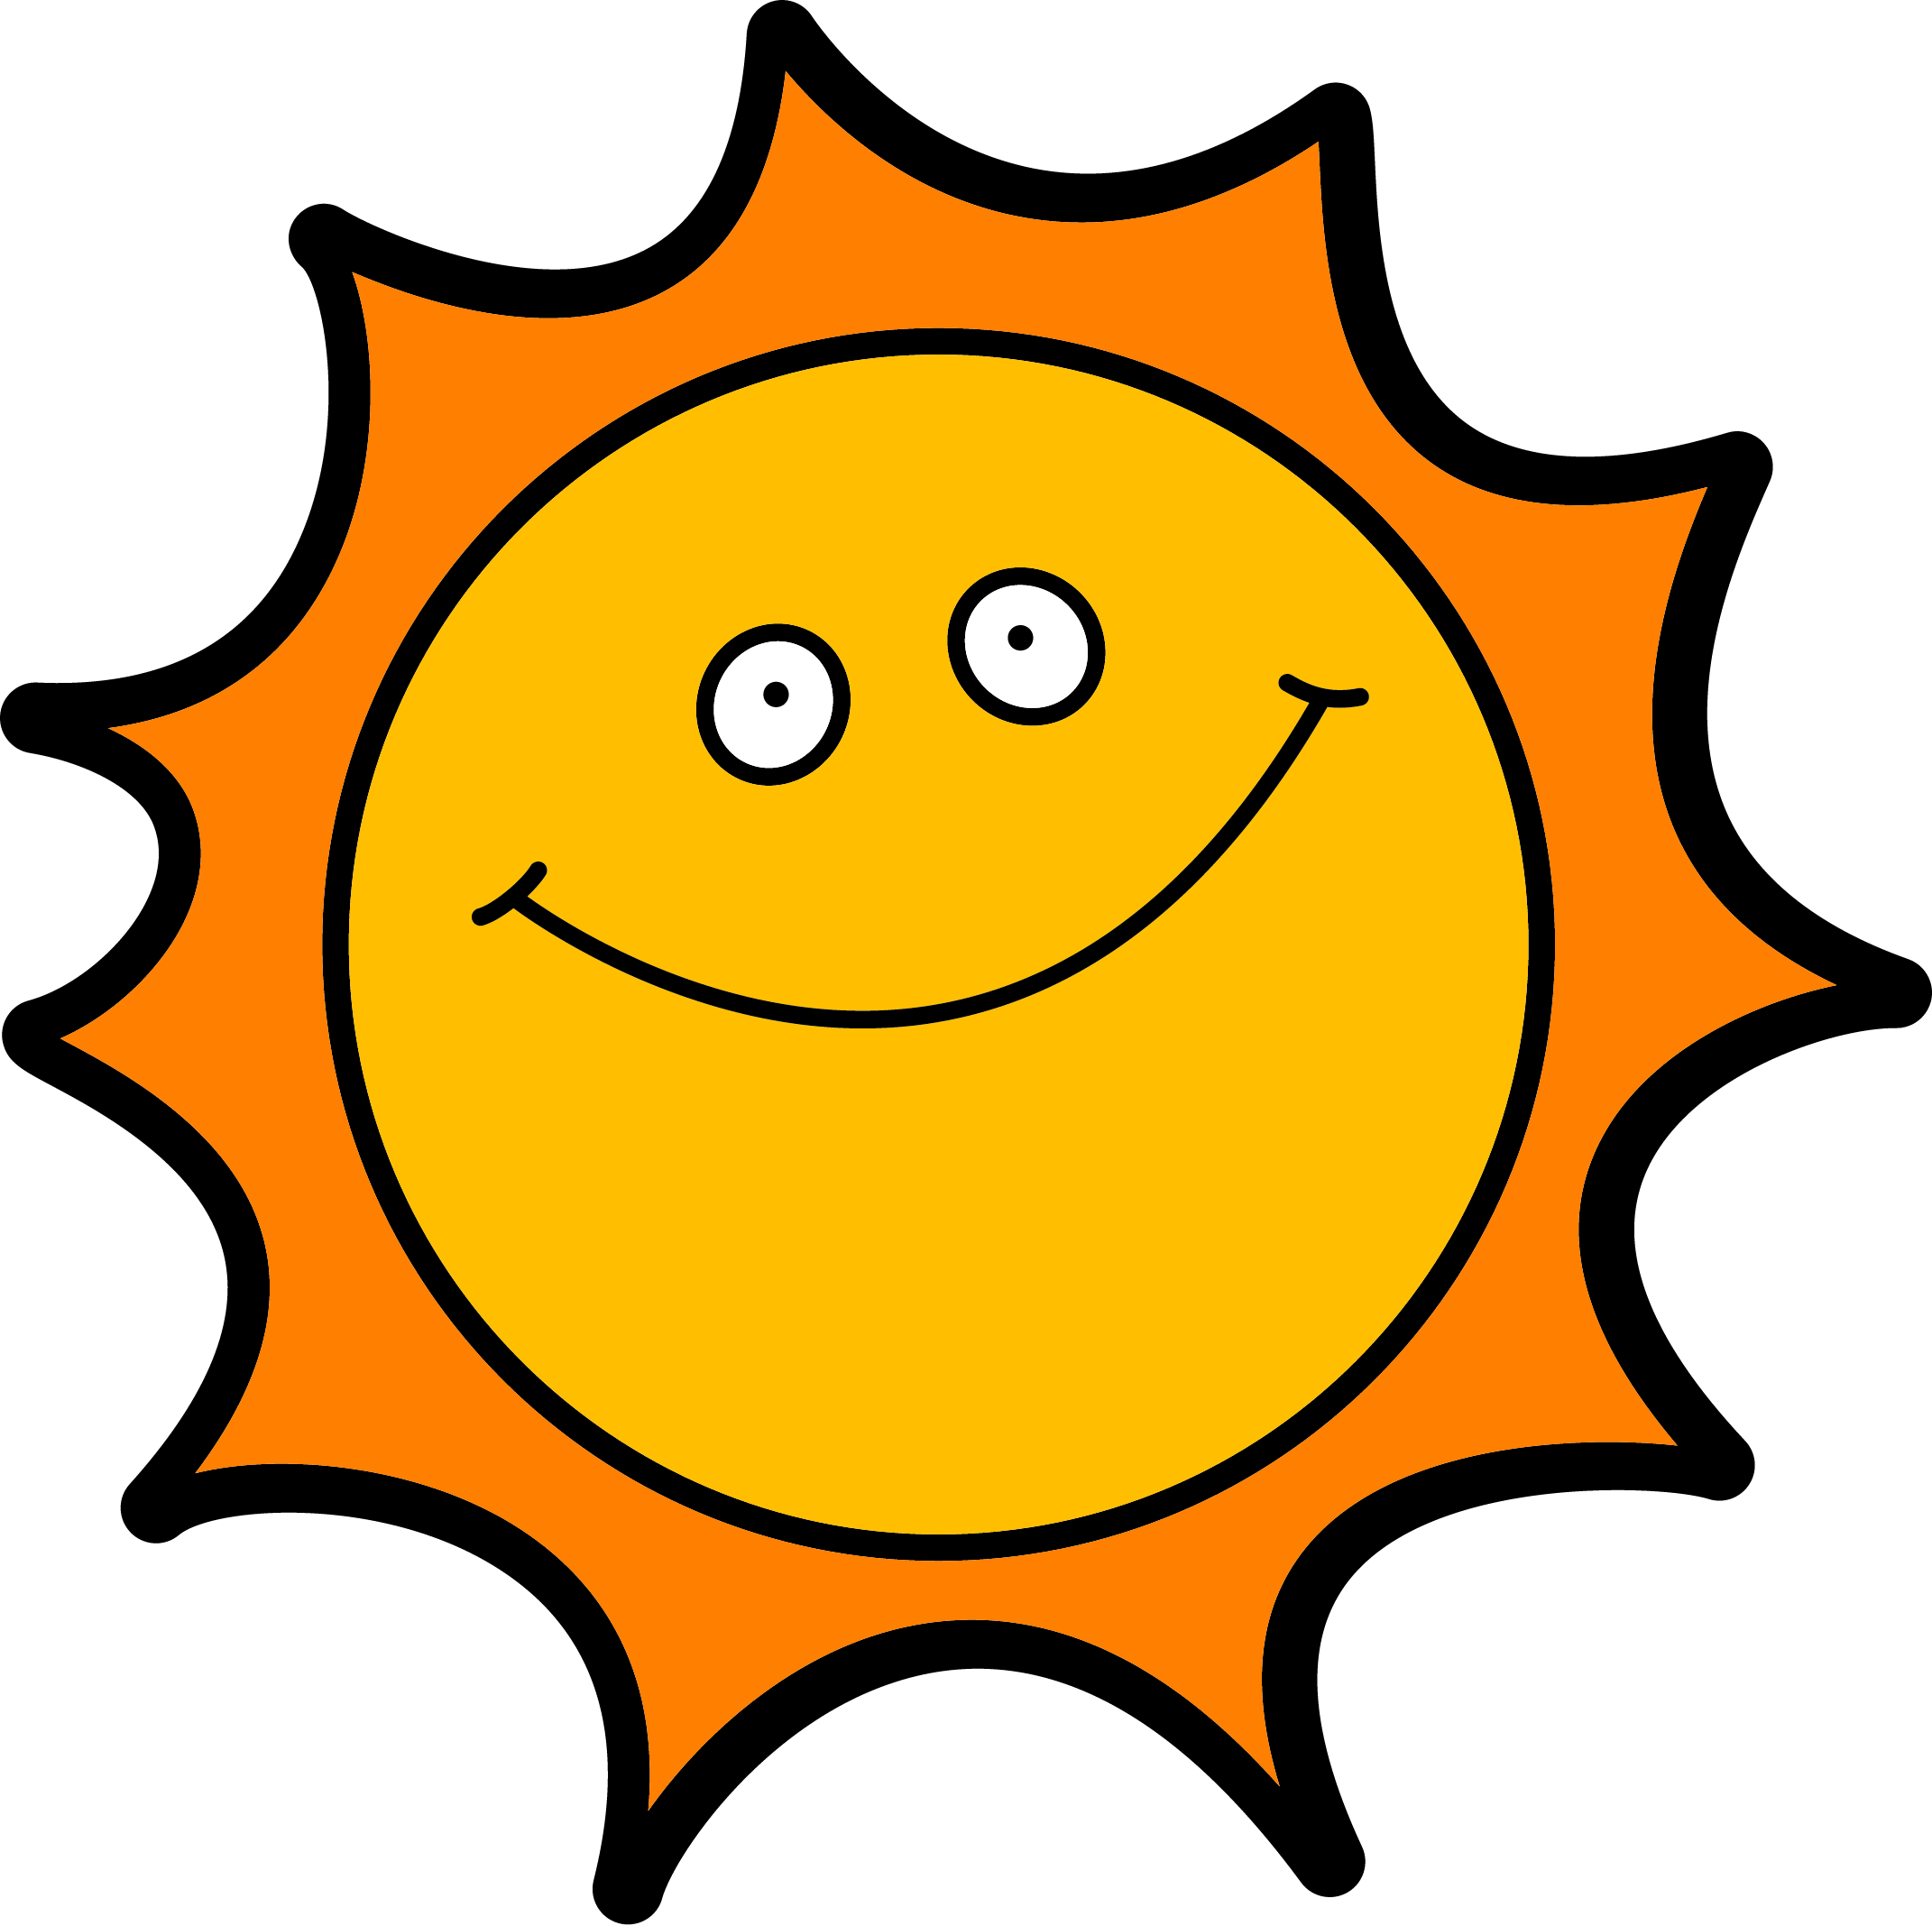 Hot Sun Images - Clipart library | Clipart library - Free Clipart Images